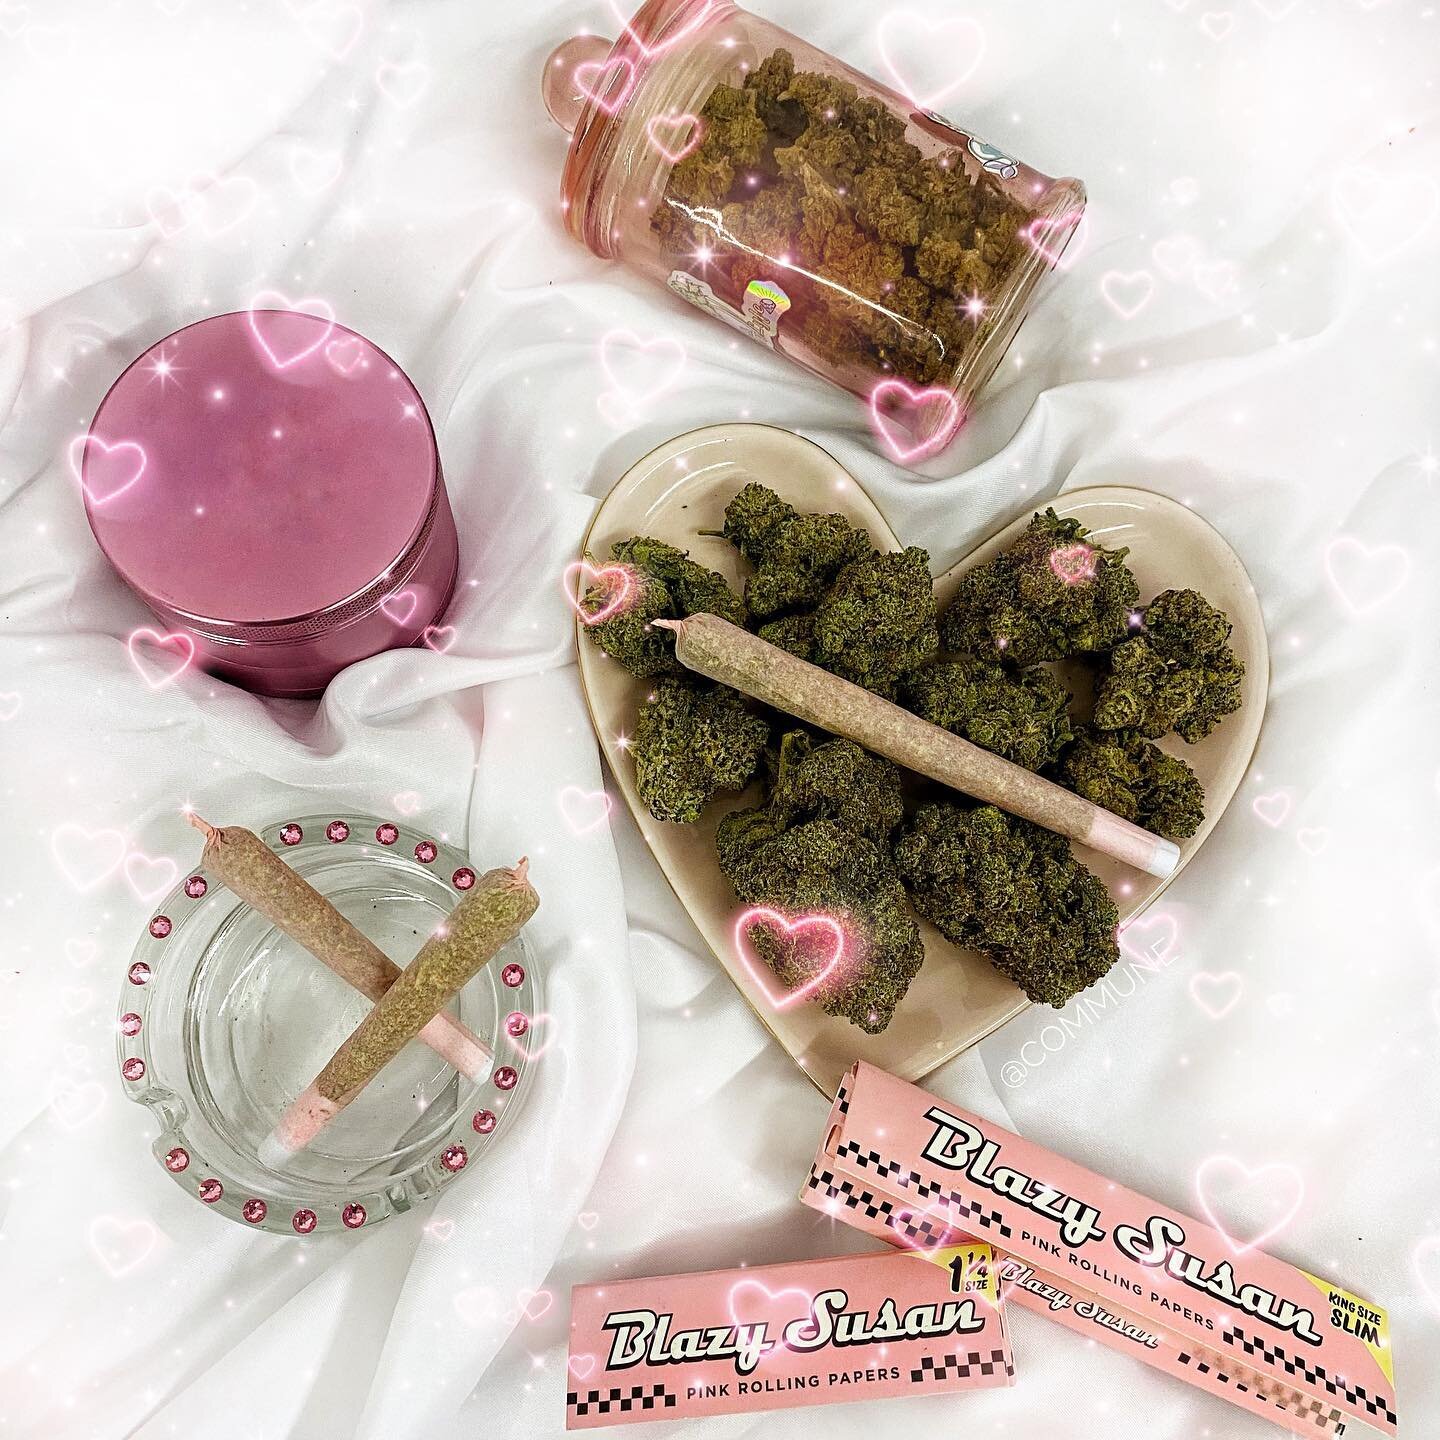 💗 Are you ready for your Valentine&rsquo;s Day sesh? Don&rsquo;t worry we got plenty of flowers for your valentine! 😉 Ft. Purple Cake - (Sativa)💞